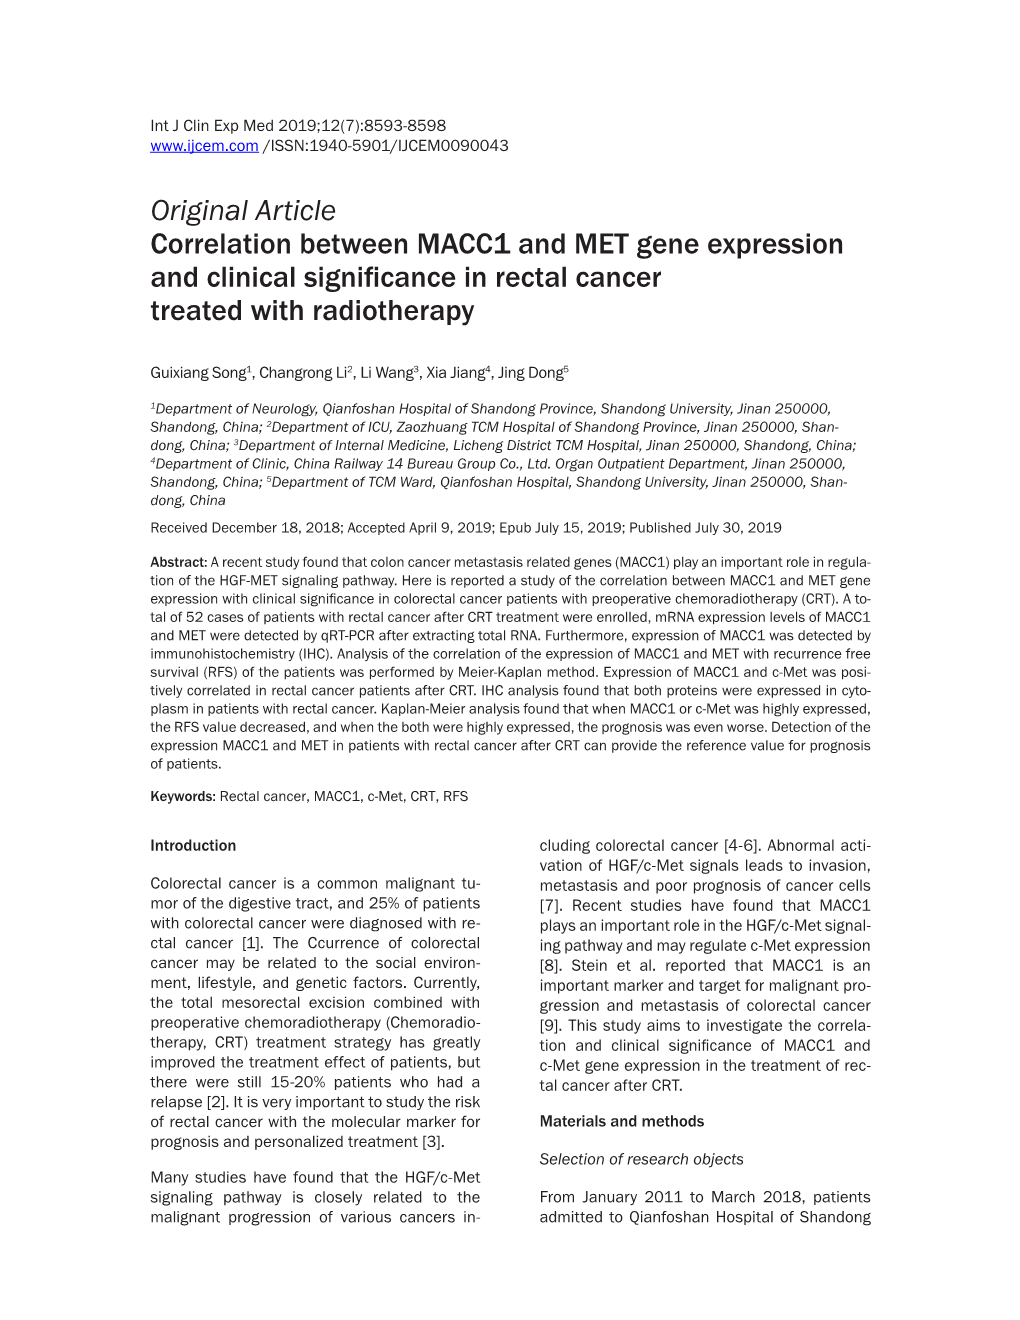 Original Article Correlation Between MACC1 and MET Gene Expression and Clinical Significance in Rectal Cancer Treated with Radiotherapy